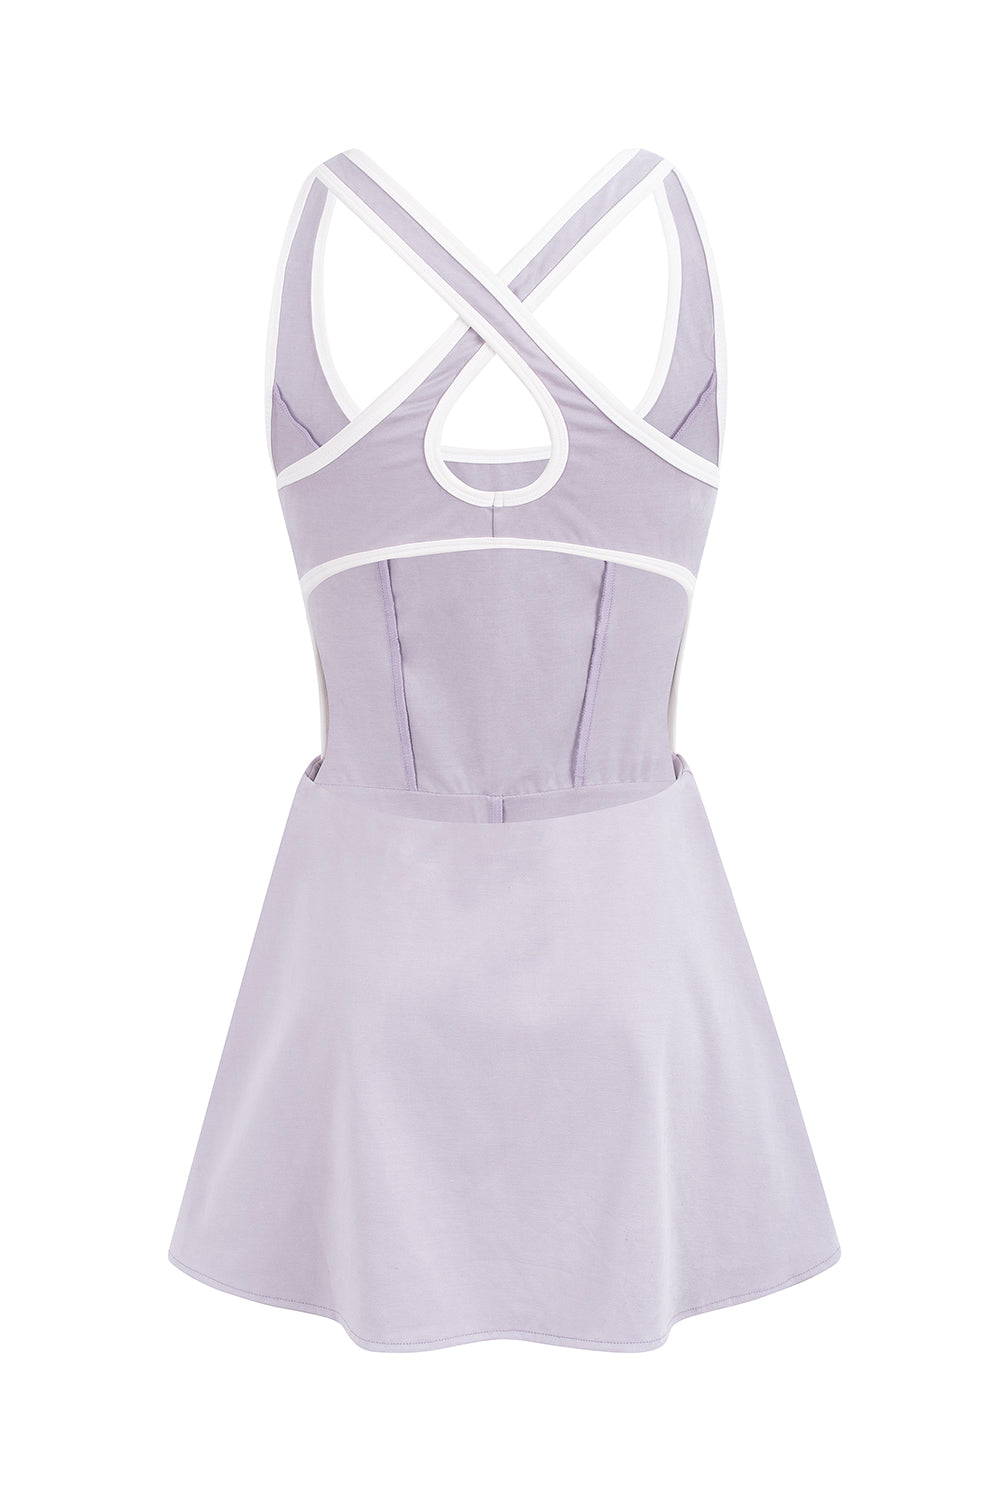 SOFT TOUCH LILAC COURT DRESS V1 (OUT OF STOCK)